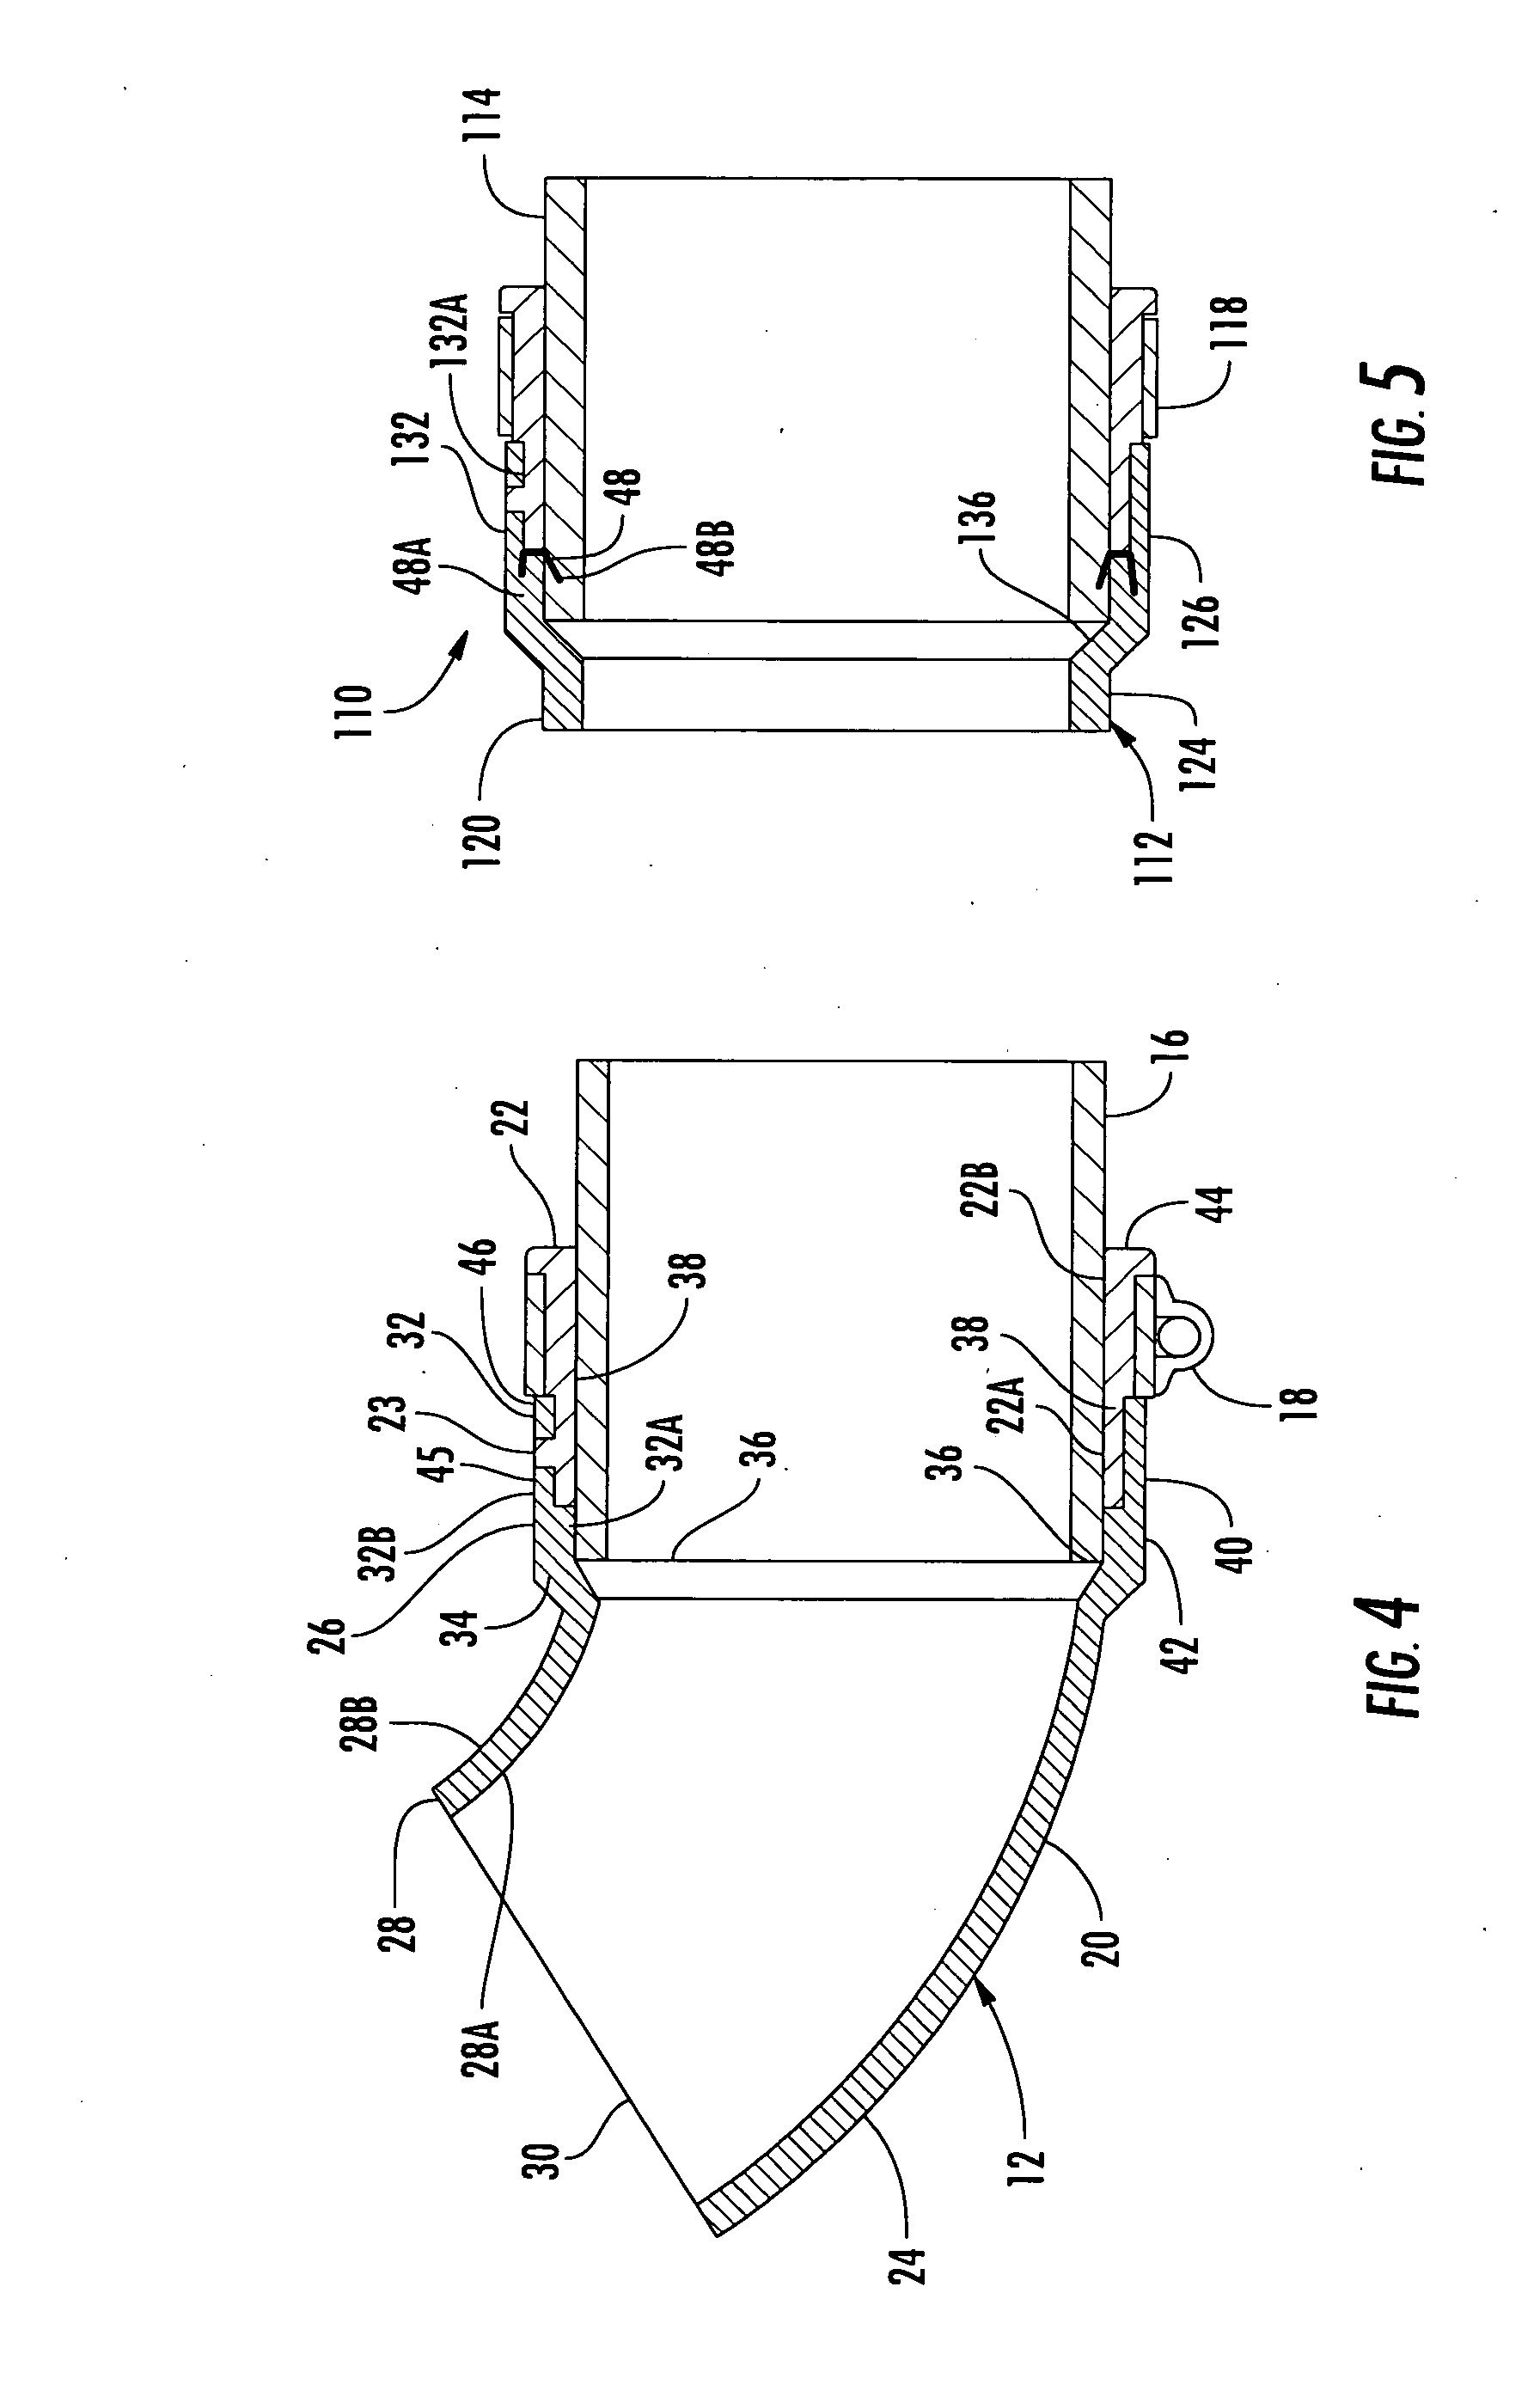 Polymeric pipe fitting and gasket assembly and sealed polymeric pipe apparatus formed therewith